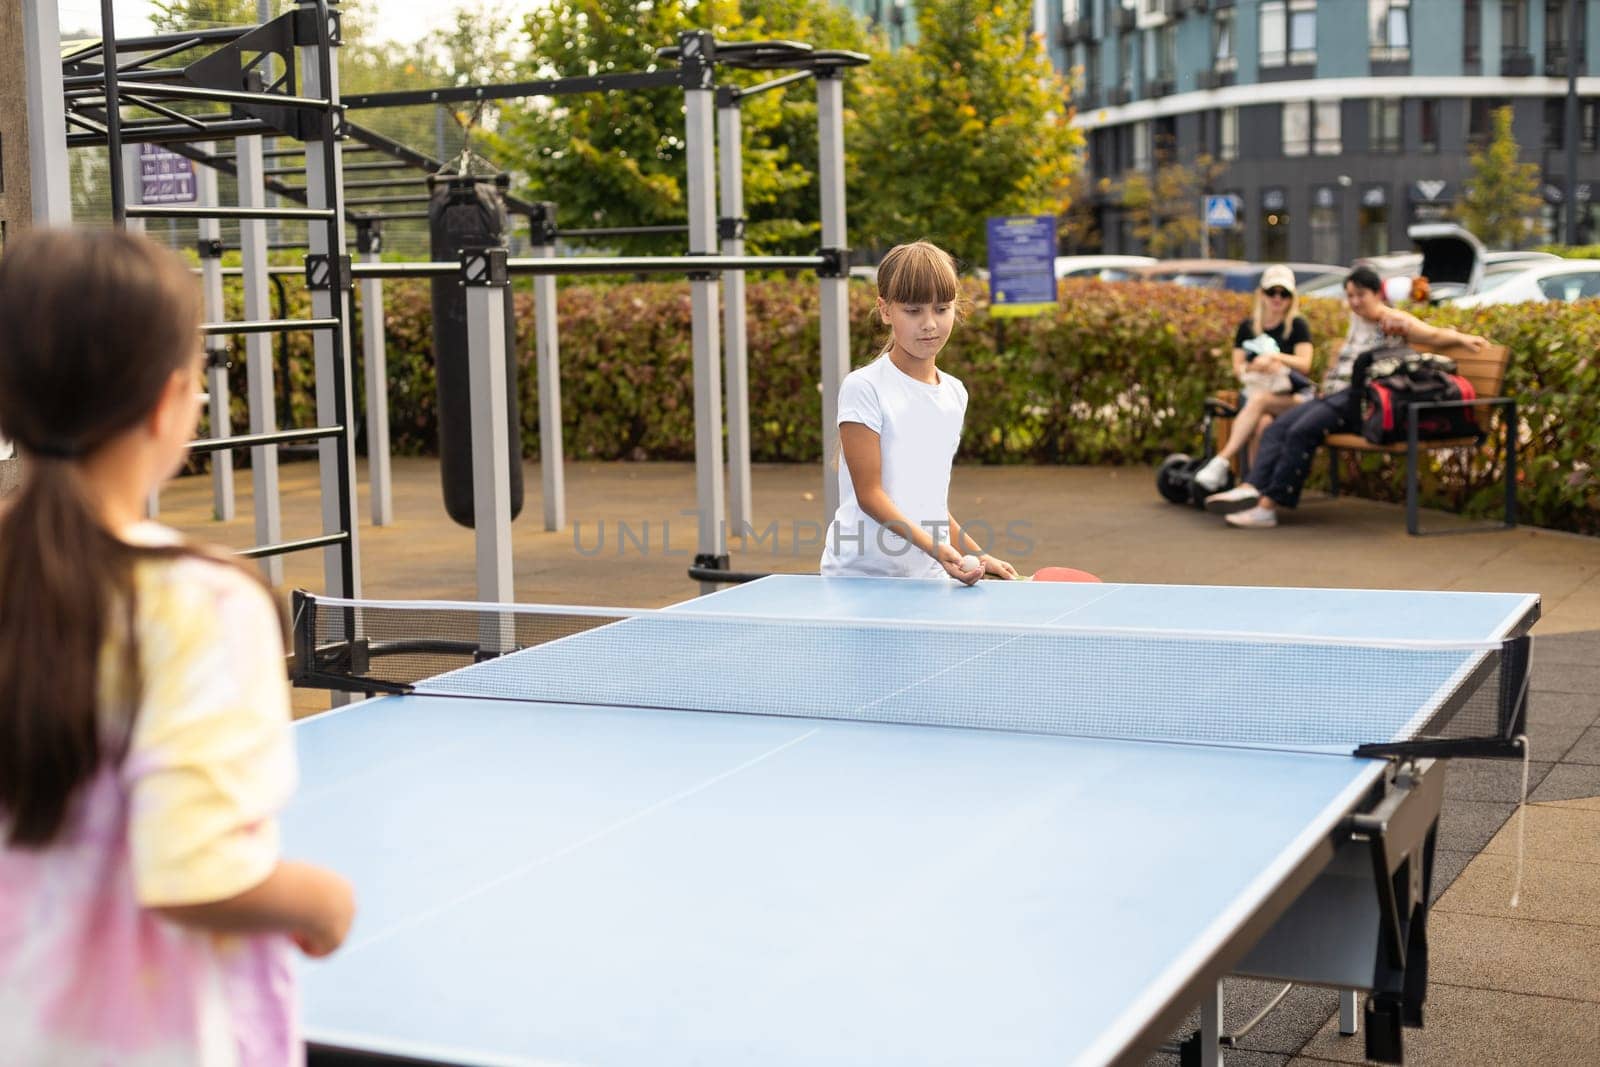 Little children playing ping pong in park. High quality photo